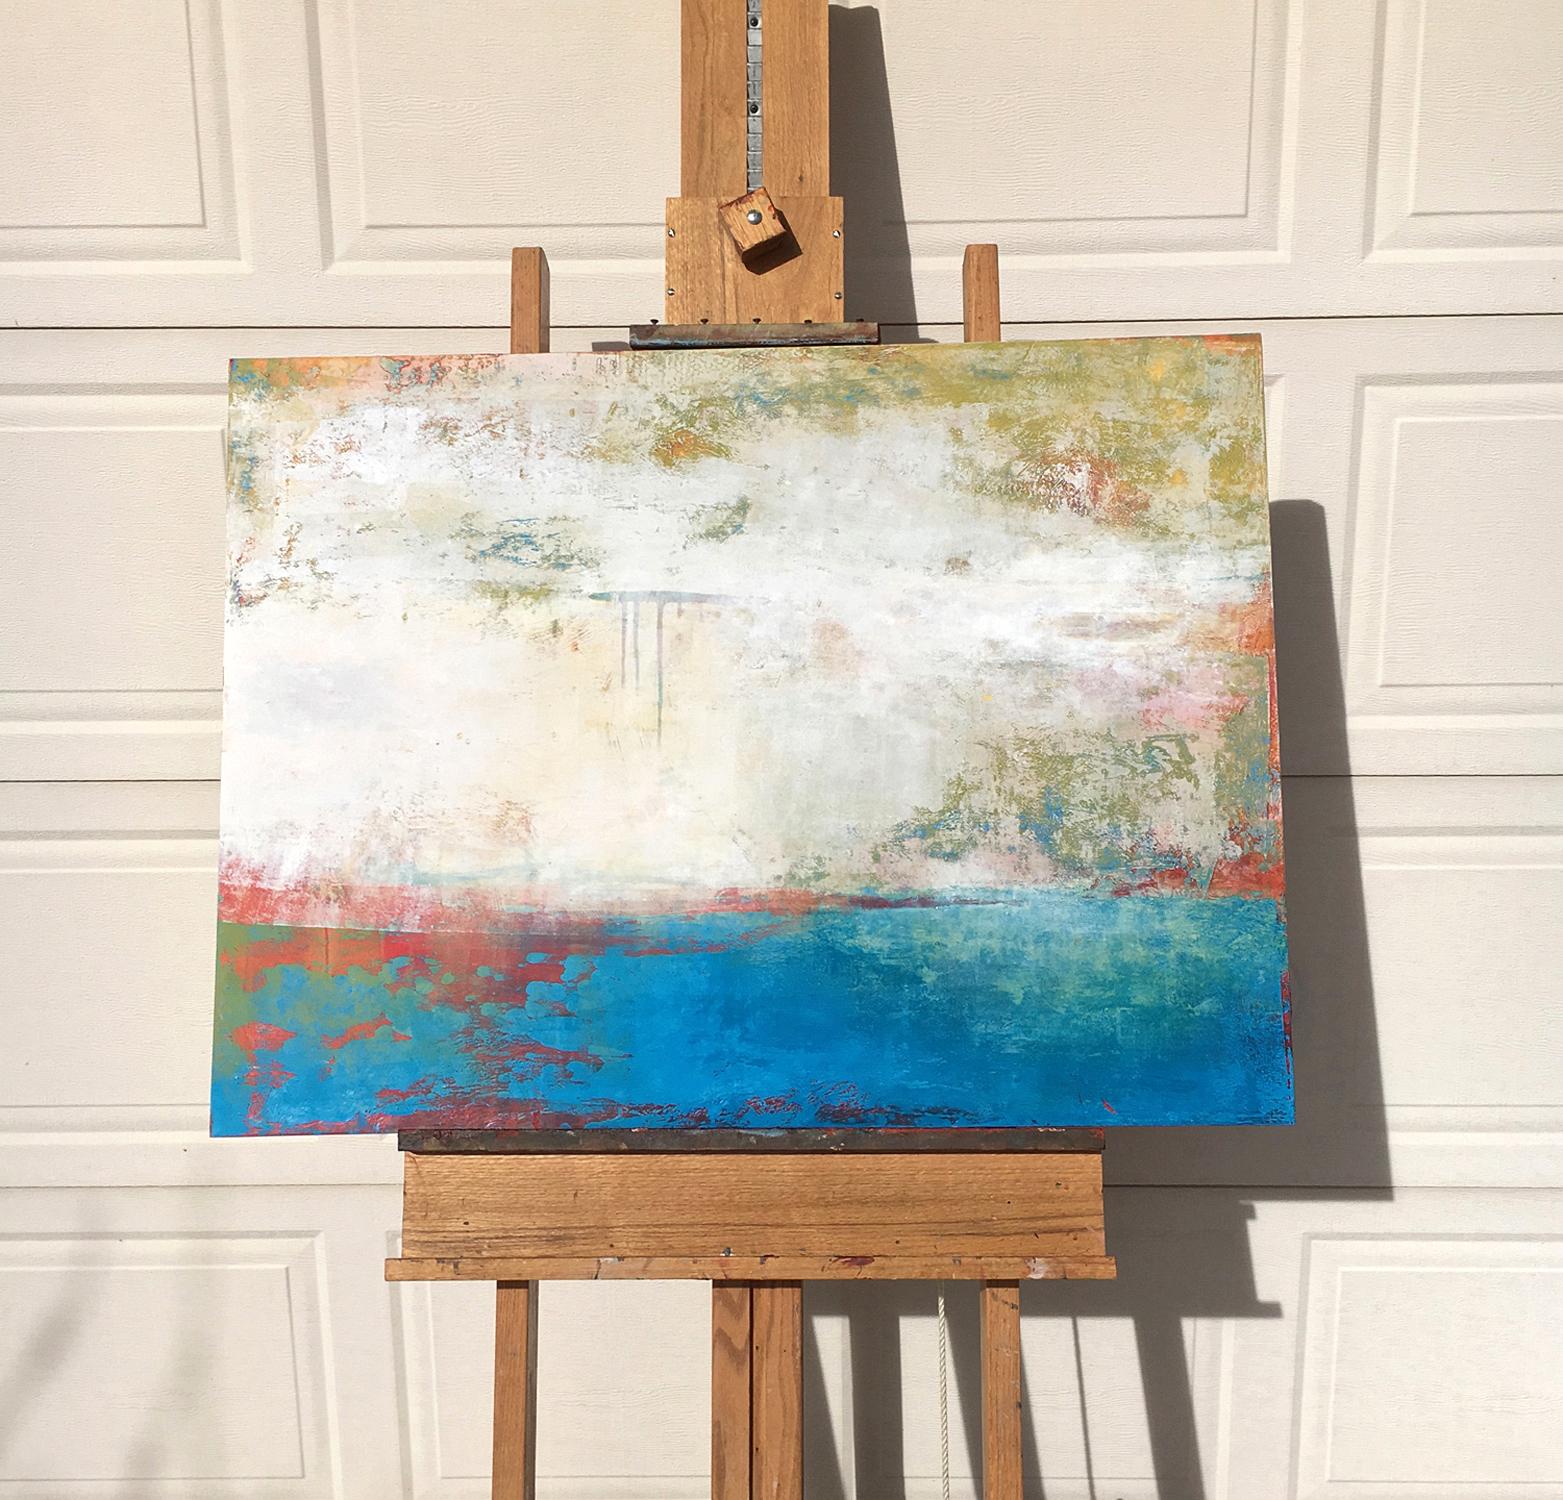 <p>Artist Comments<br>This piece was inspired by the essentials: water, sunshine, and a sense of lightness and joy,